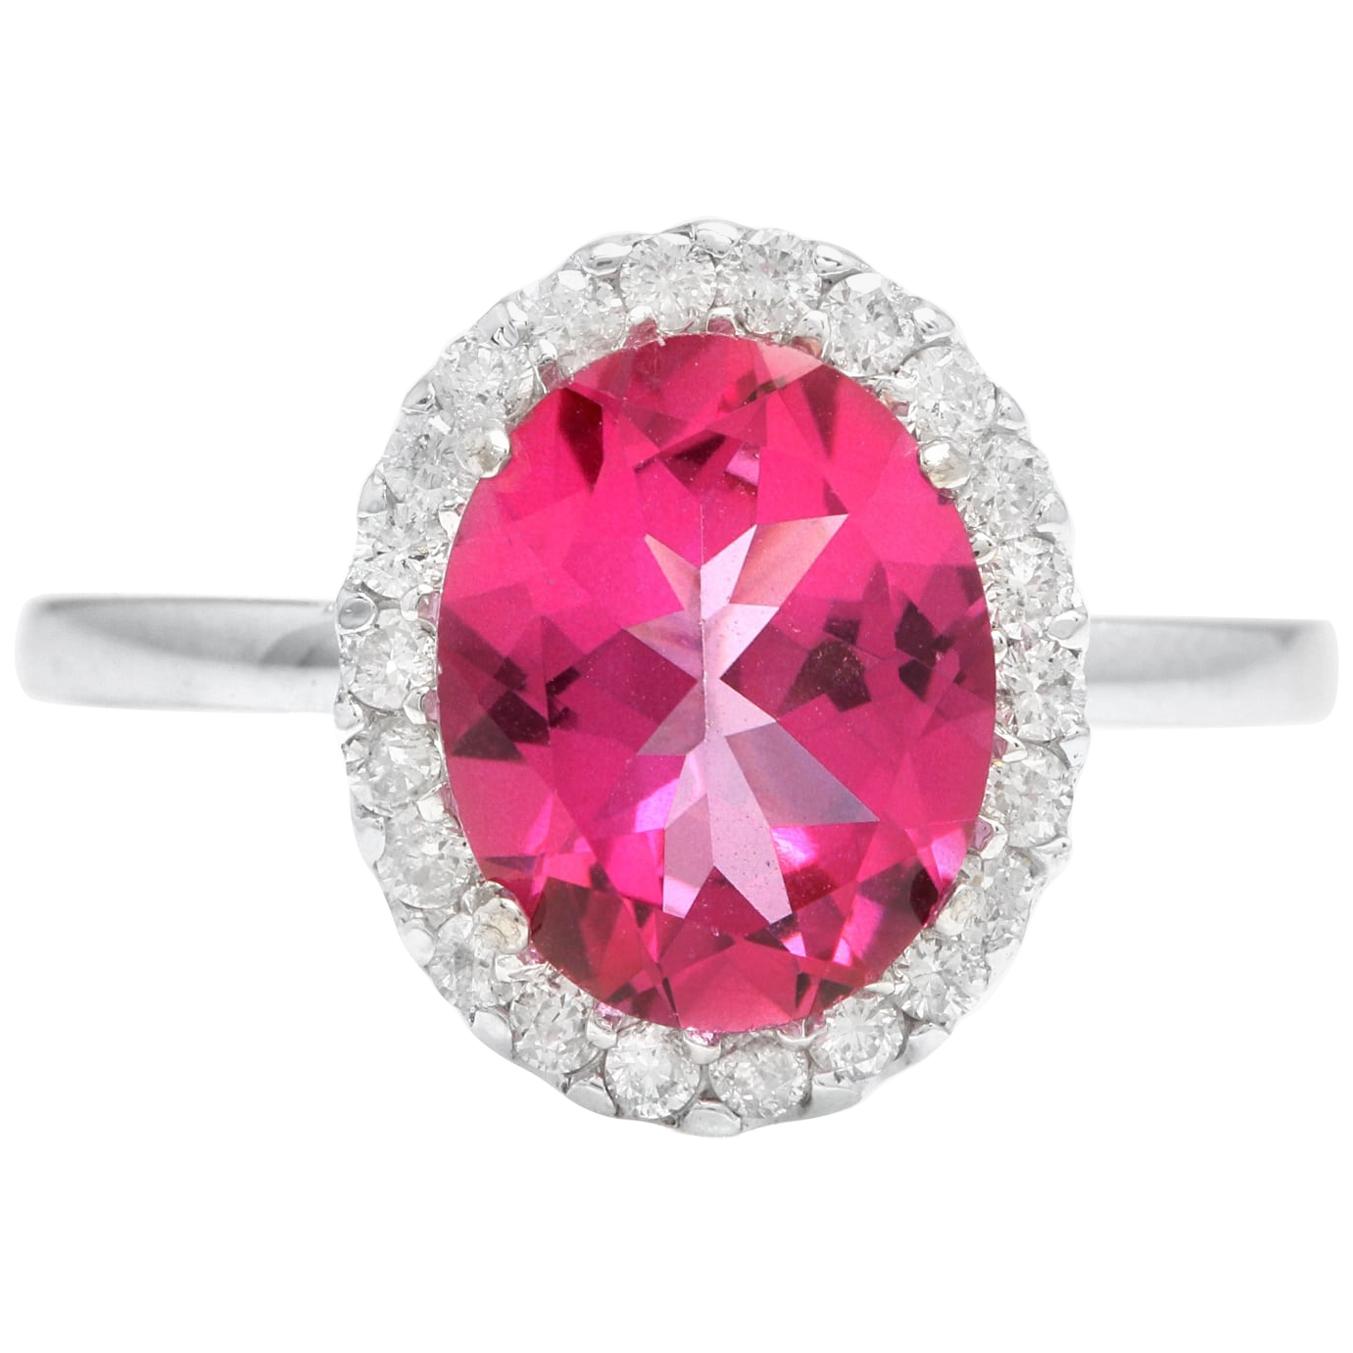 2.45 Carat Natural Pink Topaz and Diamond 14 Karat Solid White Gold Ring For Sale